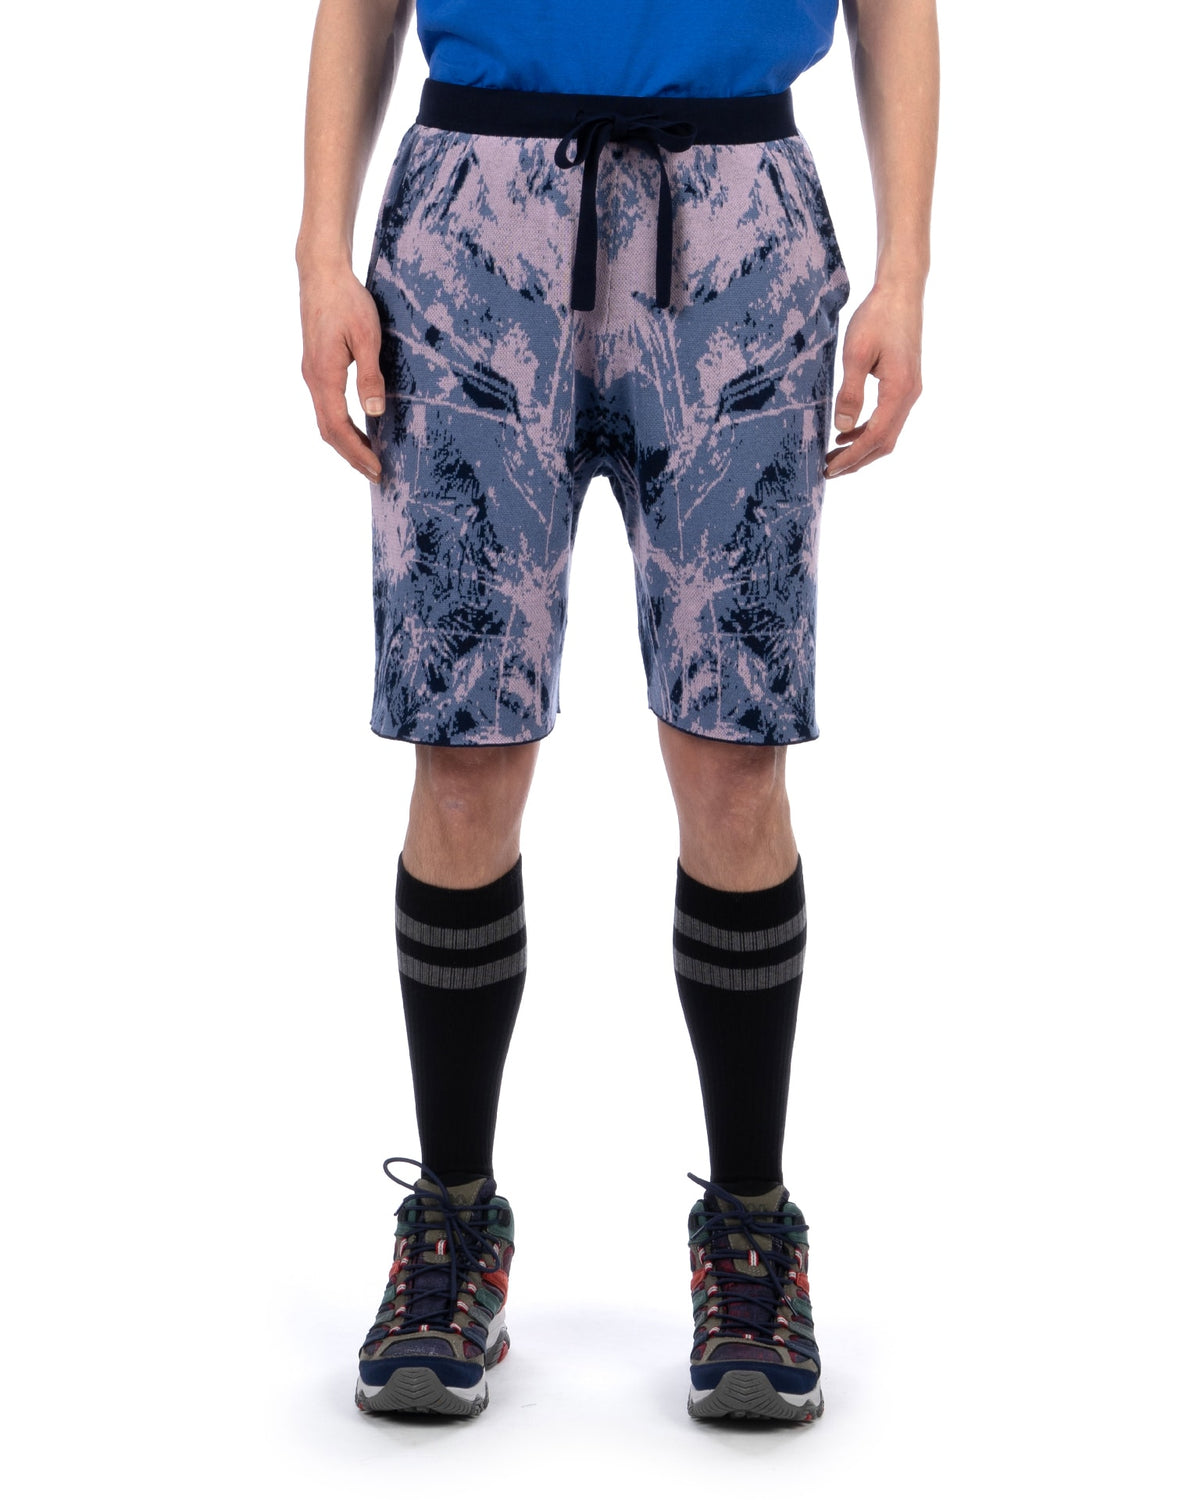 White Mountaineering | Jungle Pattern Knit Shorts Navy / Pink - Concrete